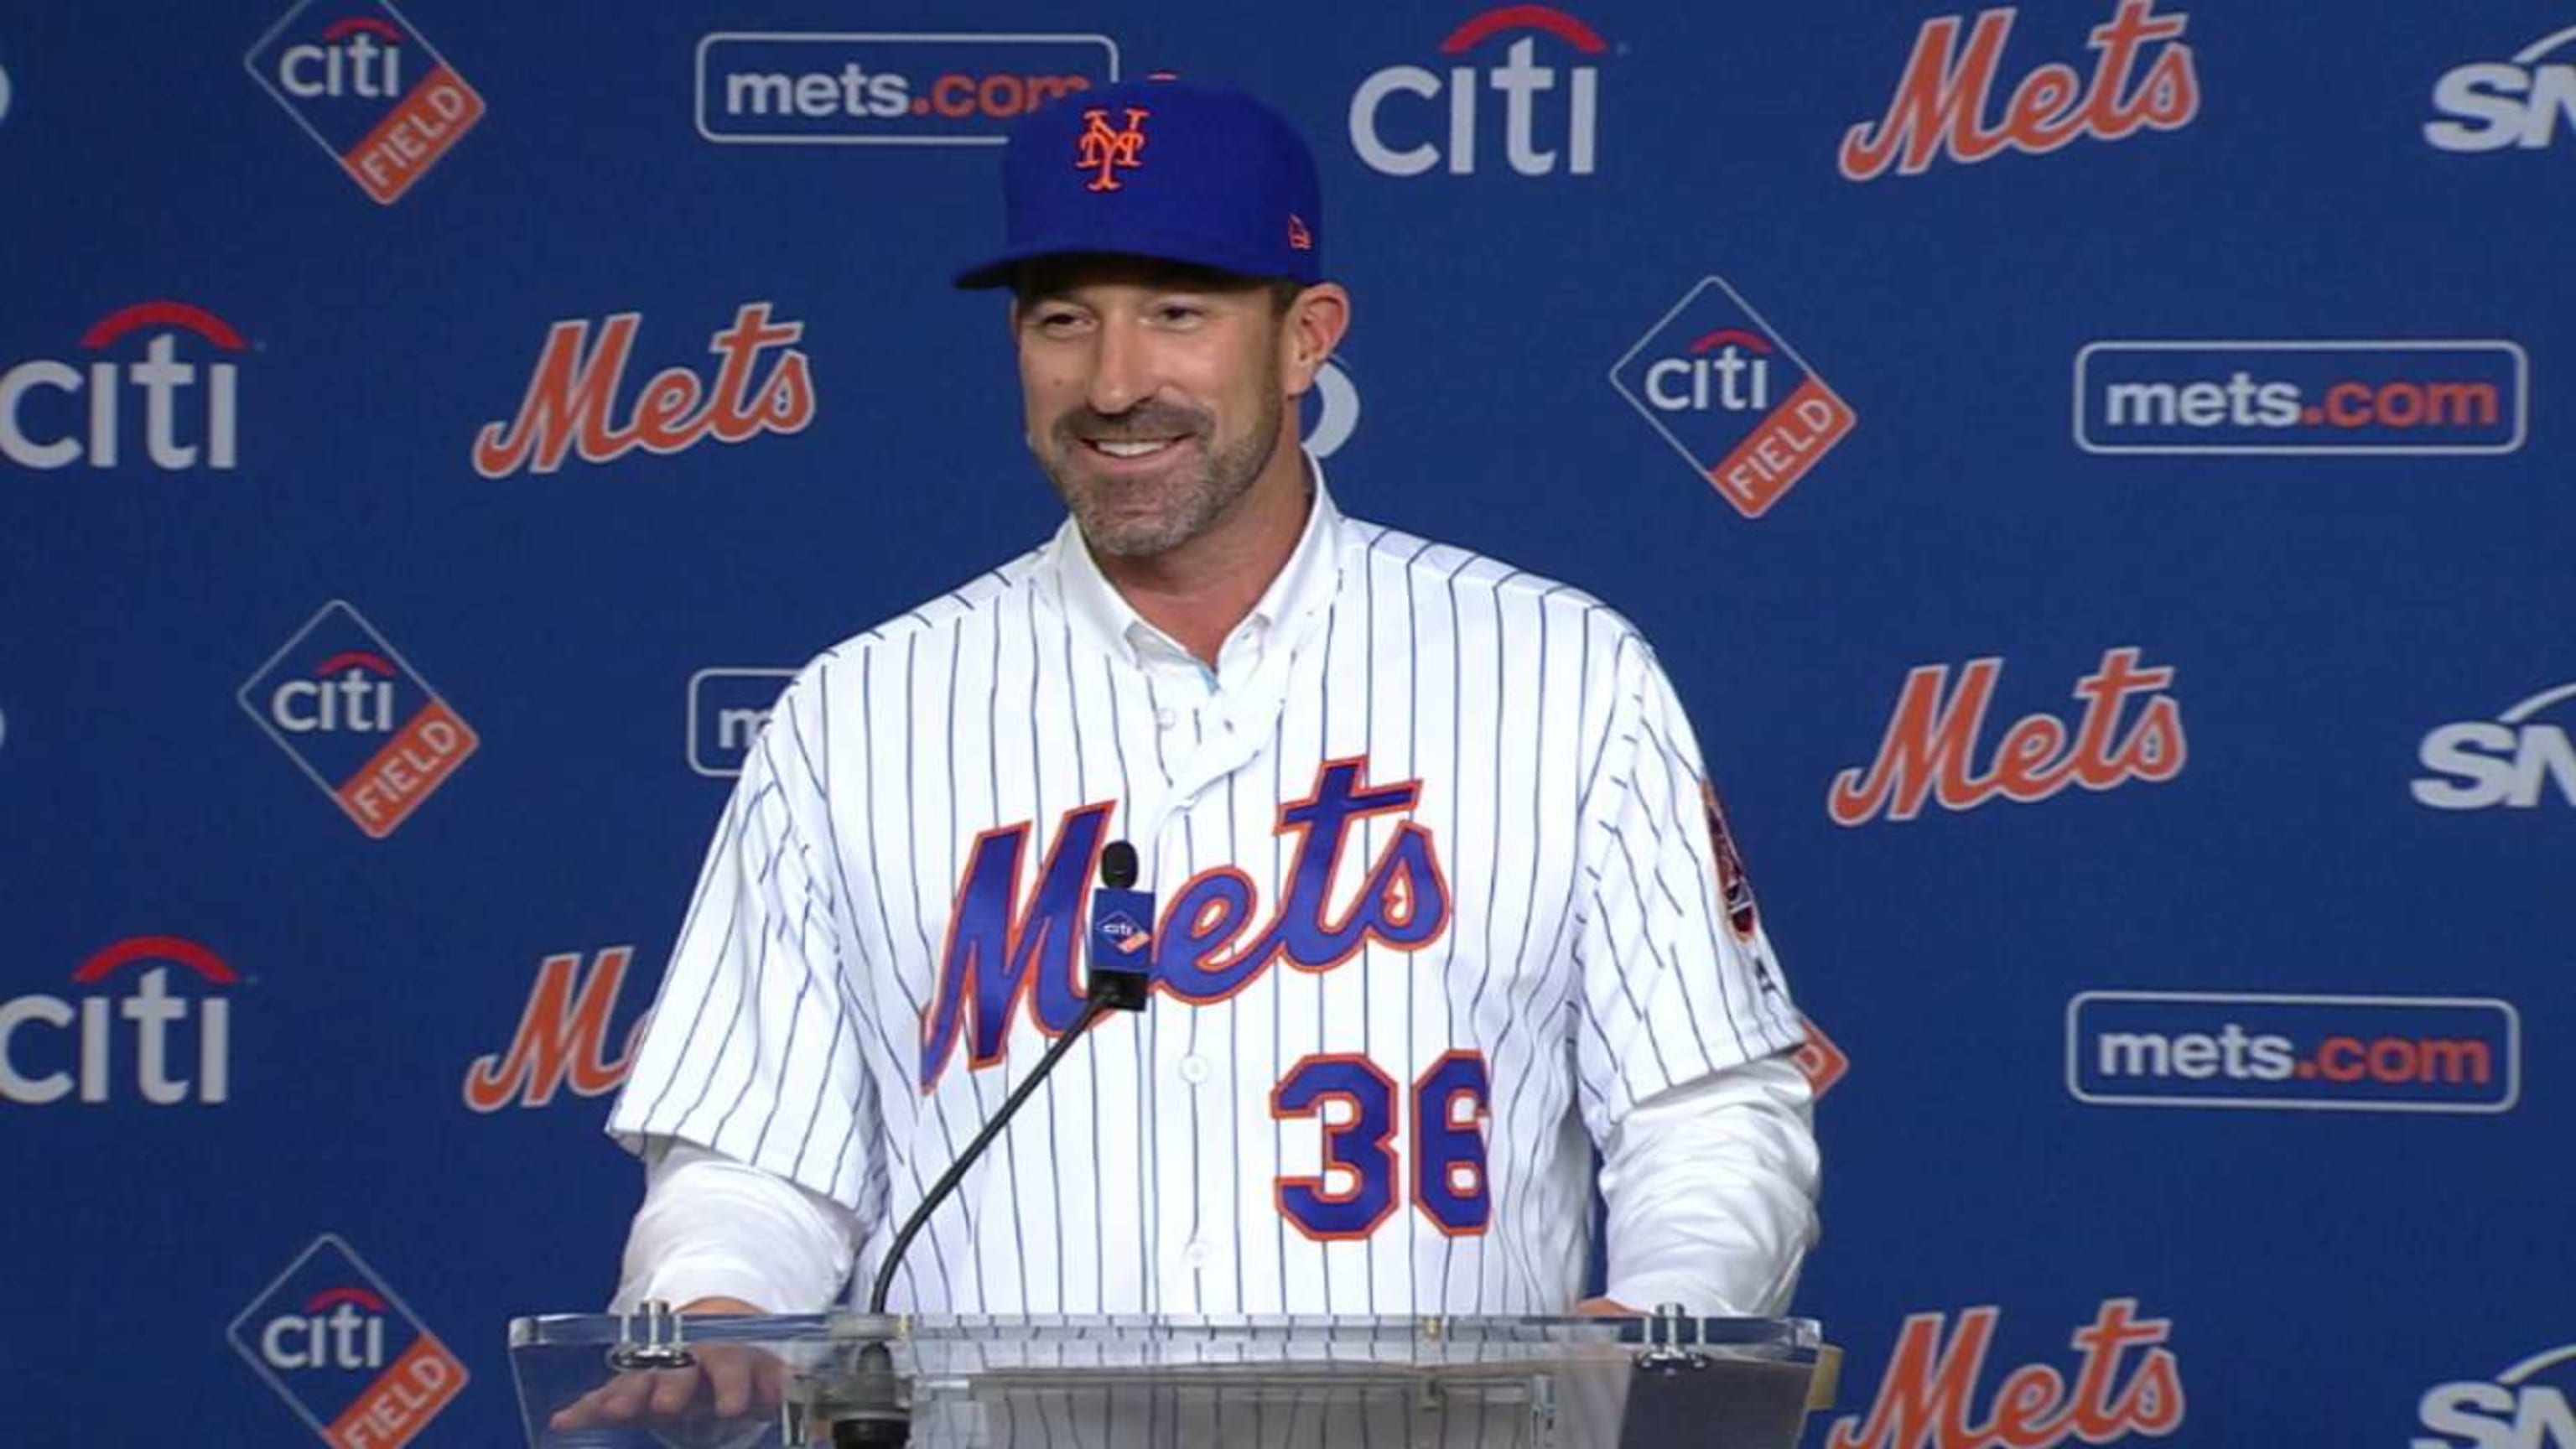 Callaway introduced by Mets as new manager 